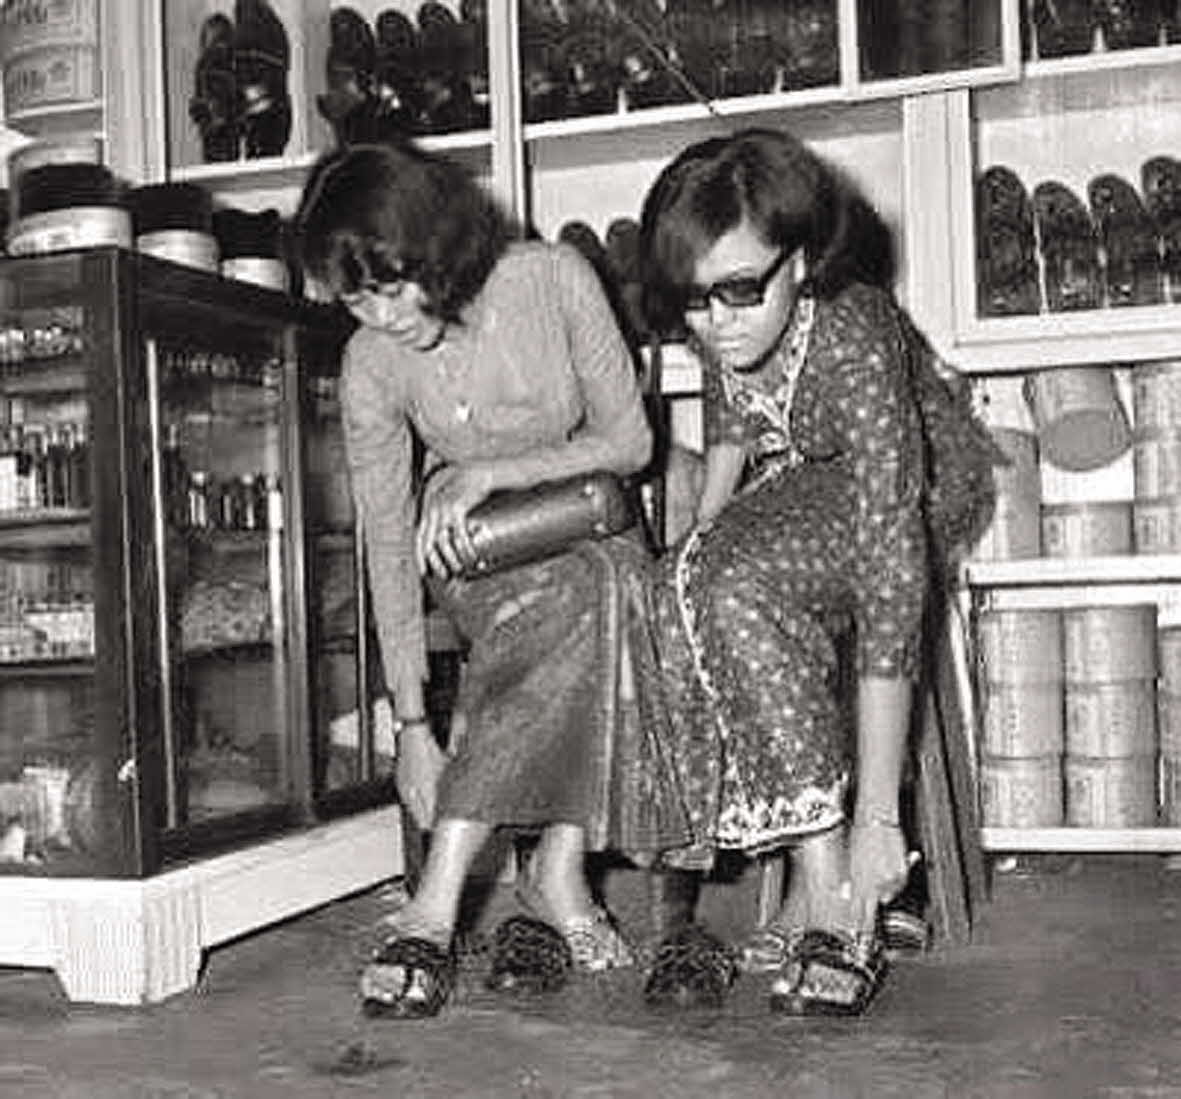 Ladies trying out H. M. Ali's shoes, mid-late 1900s